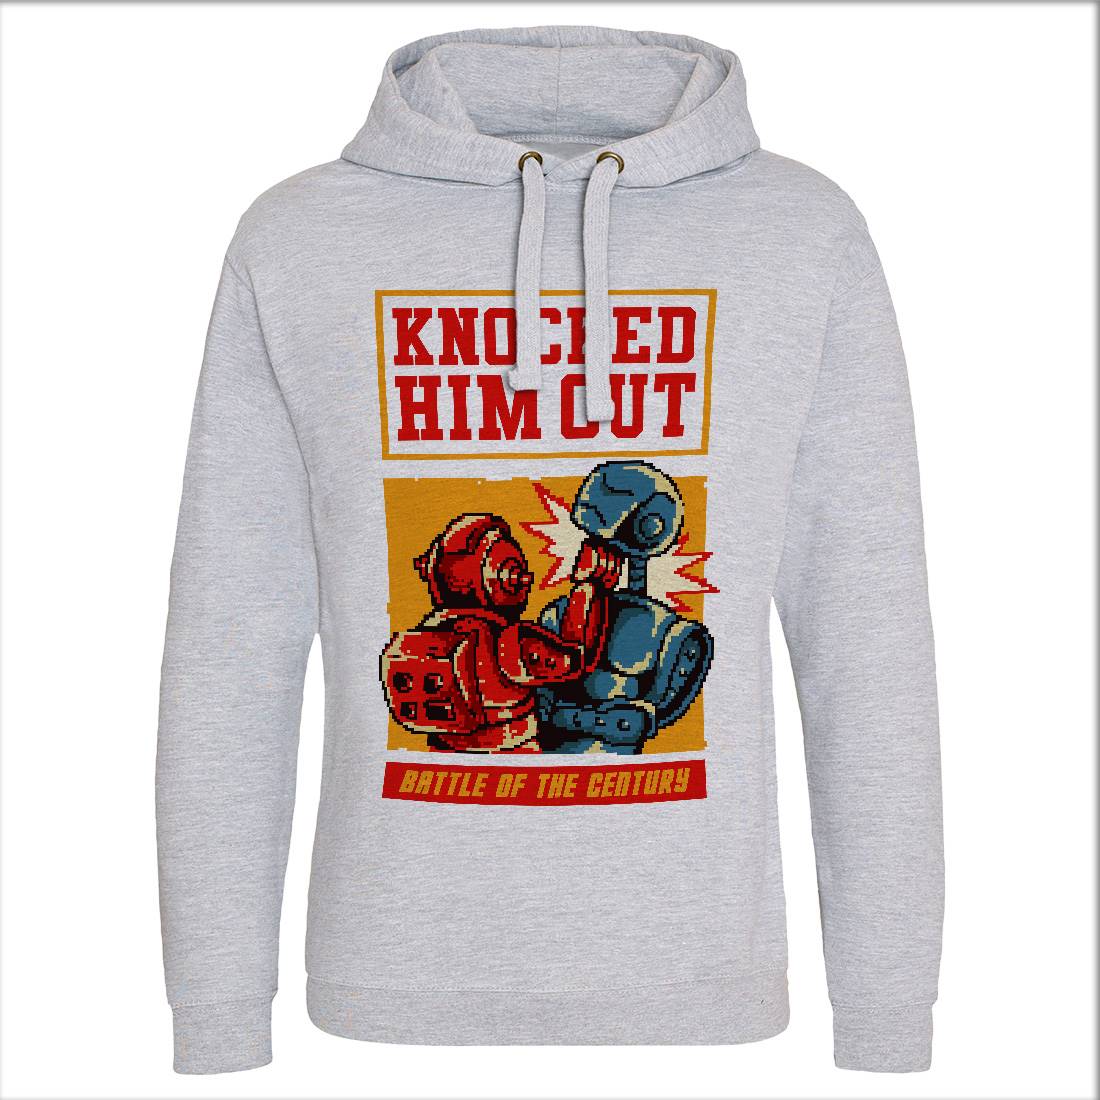 Knocked Him Out Mens Hoodie Without Pocket Space B923